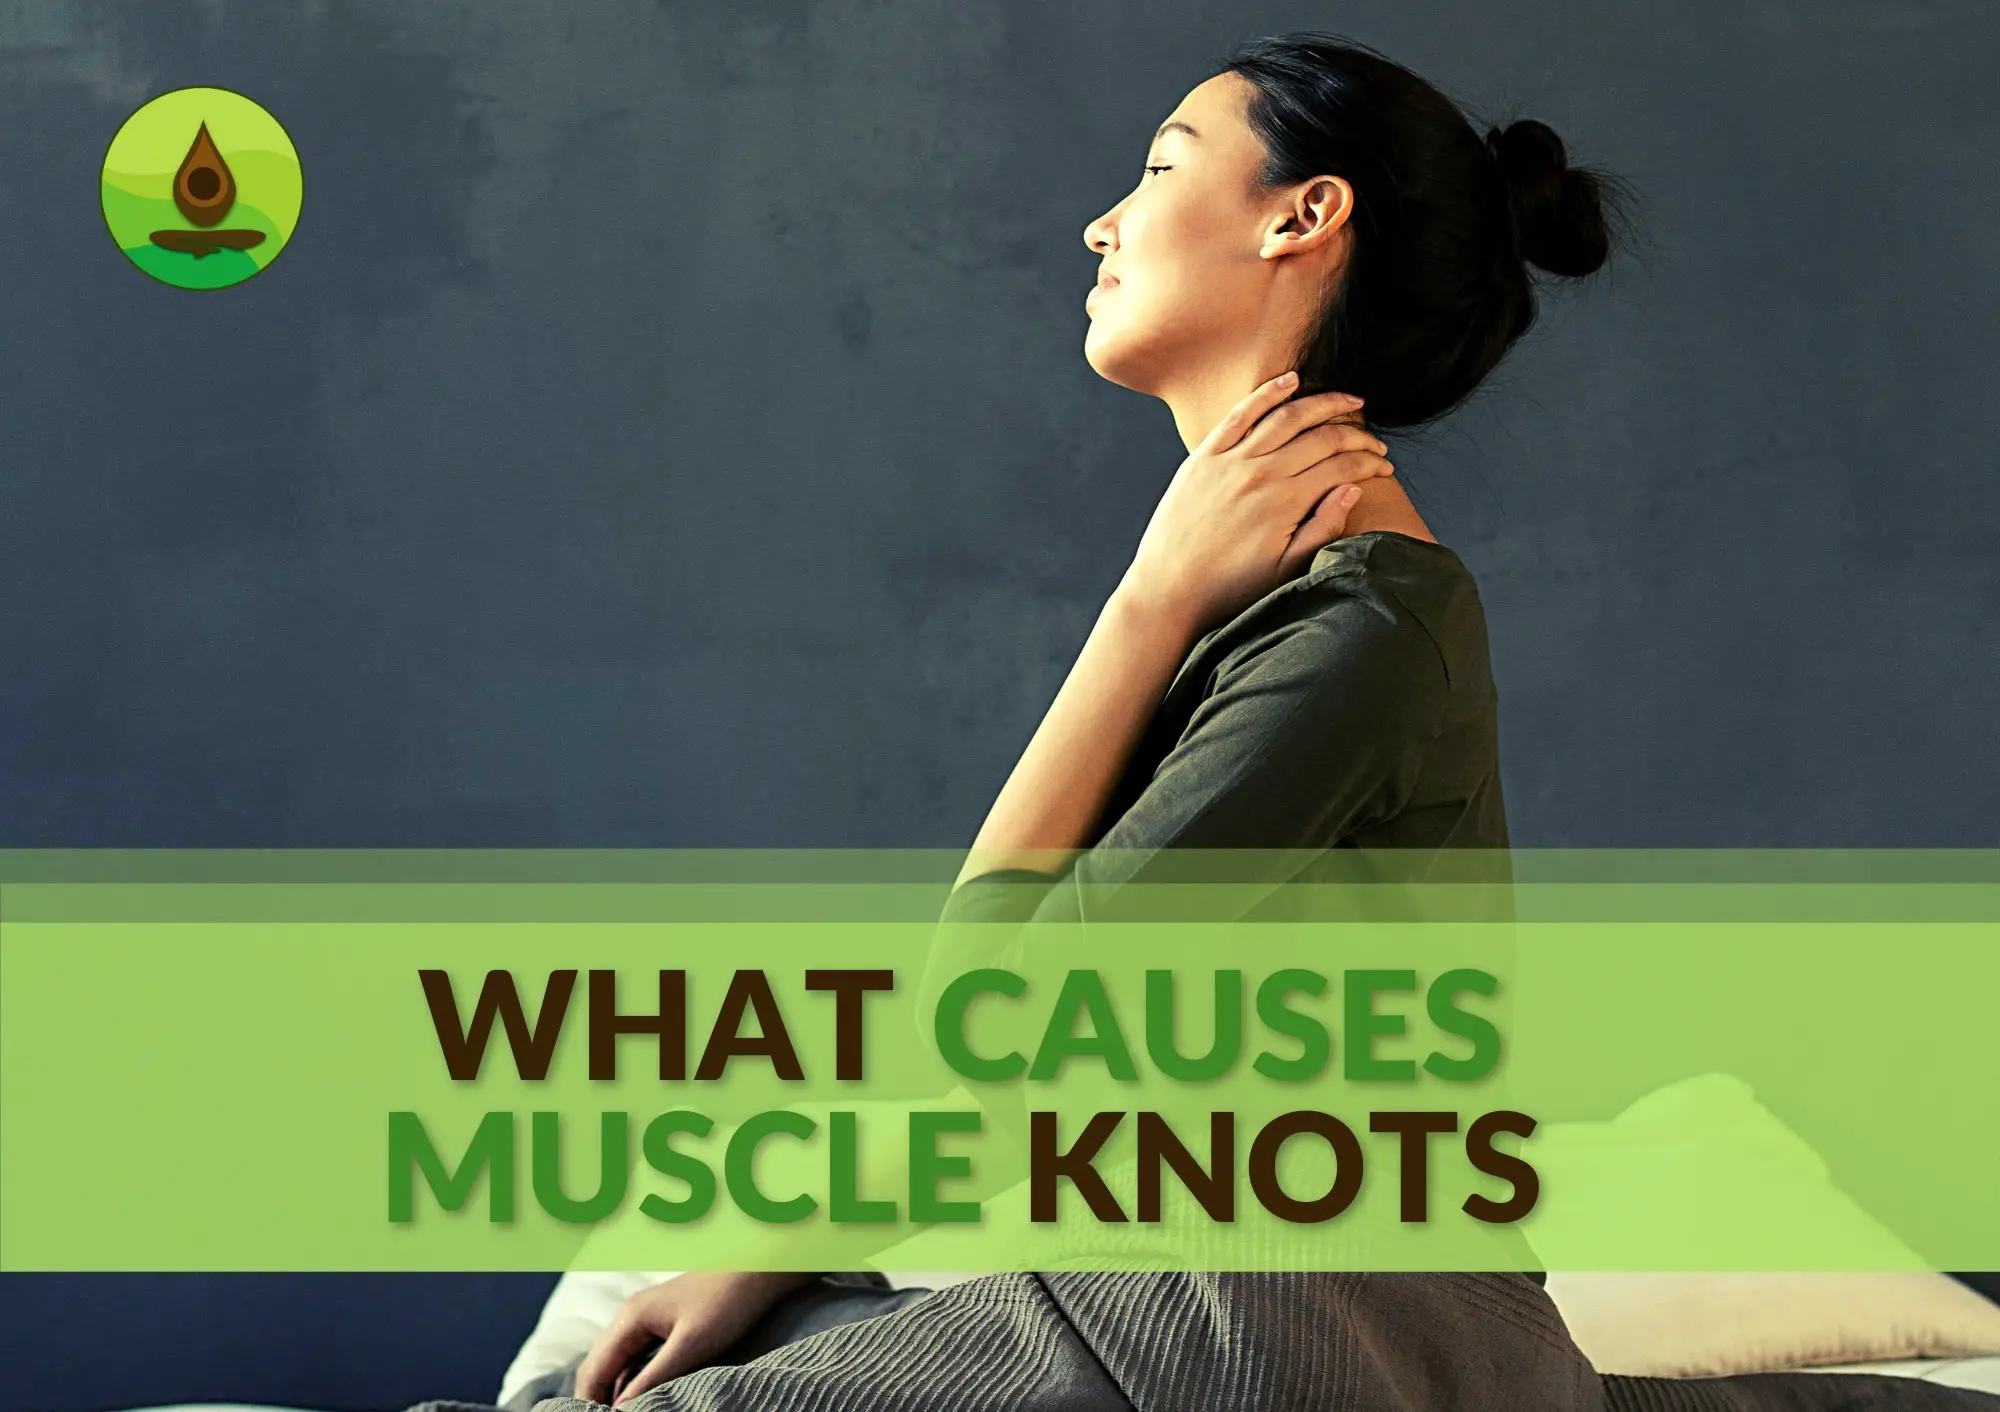 how to prevent muscle knots